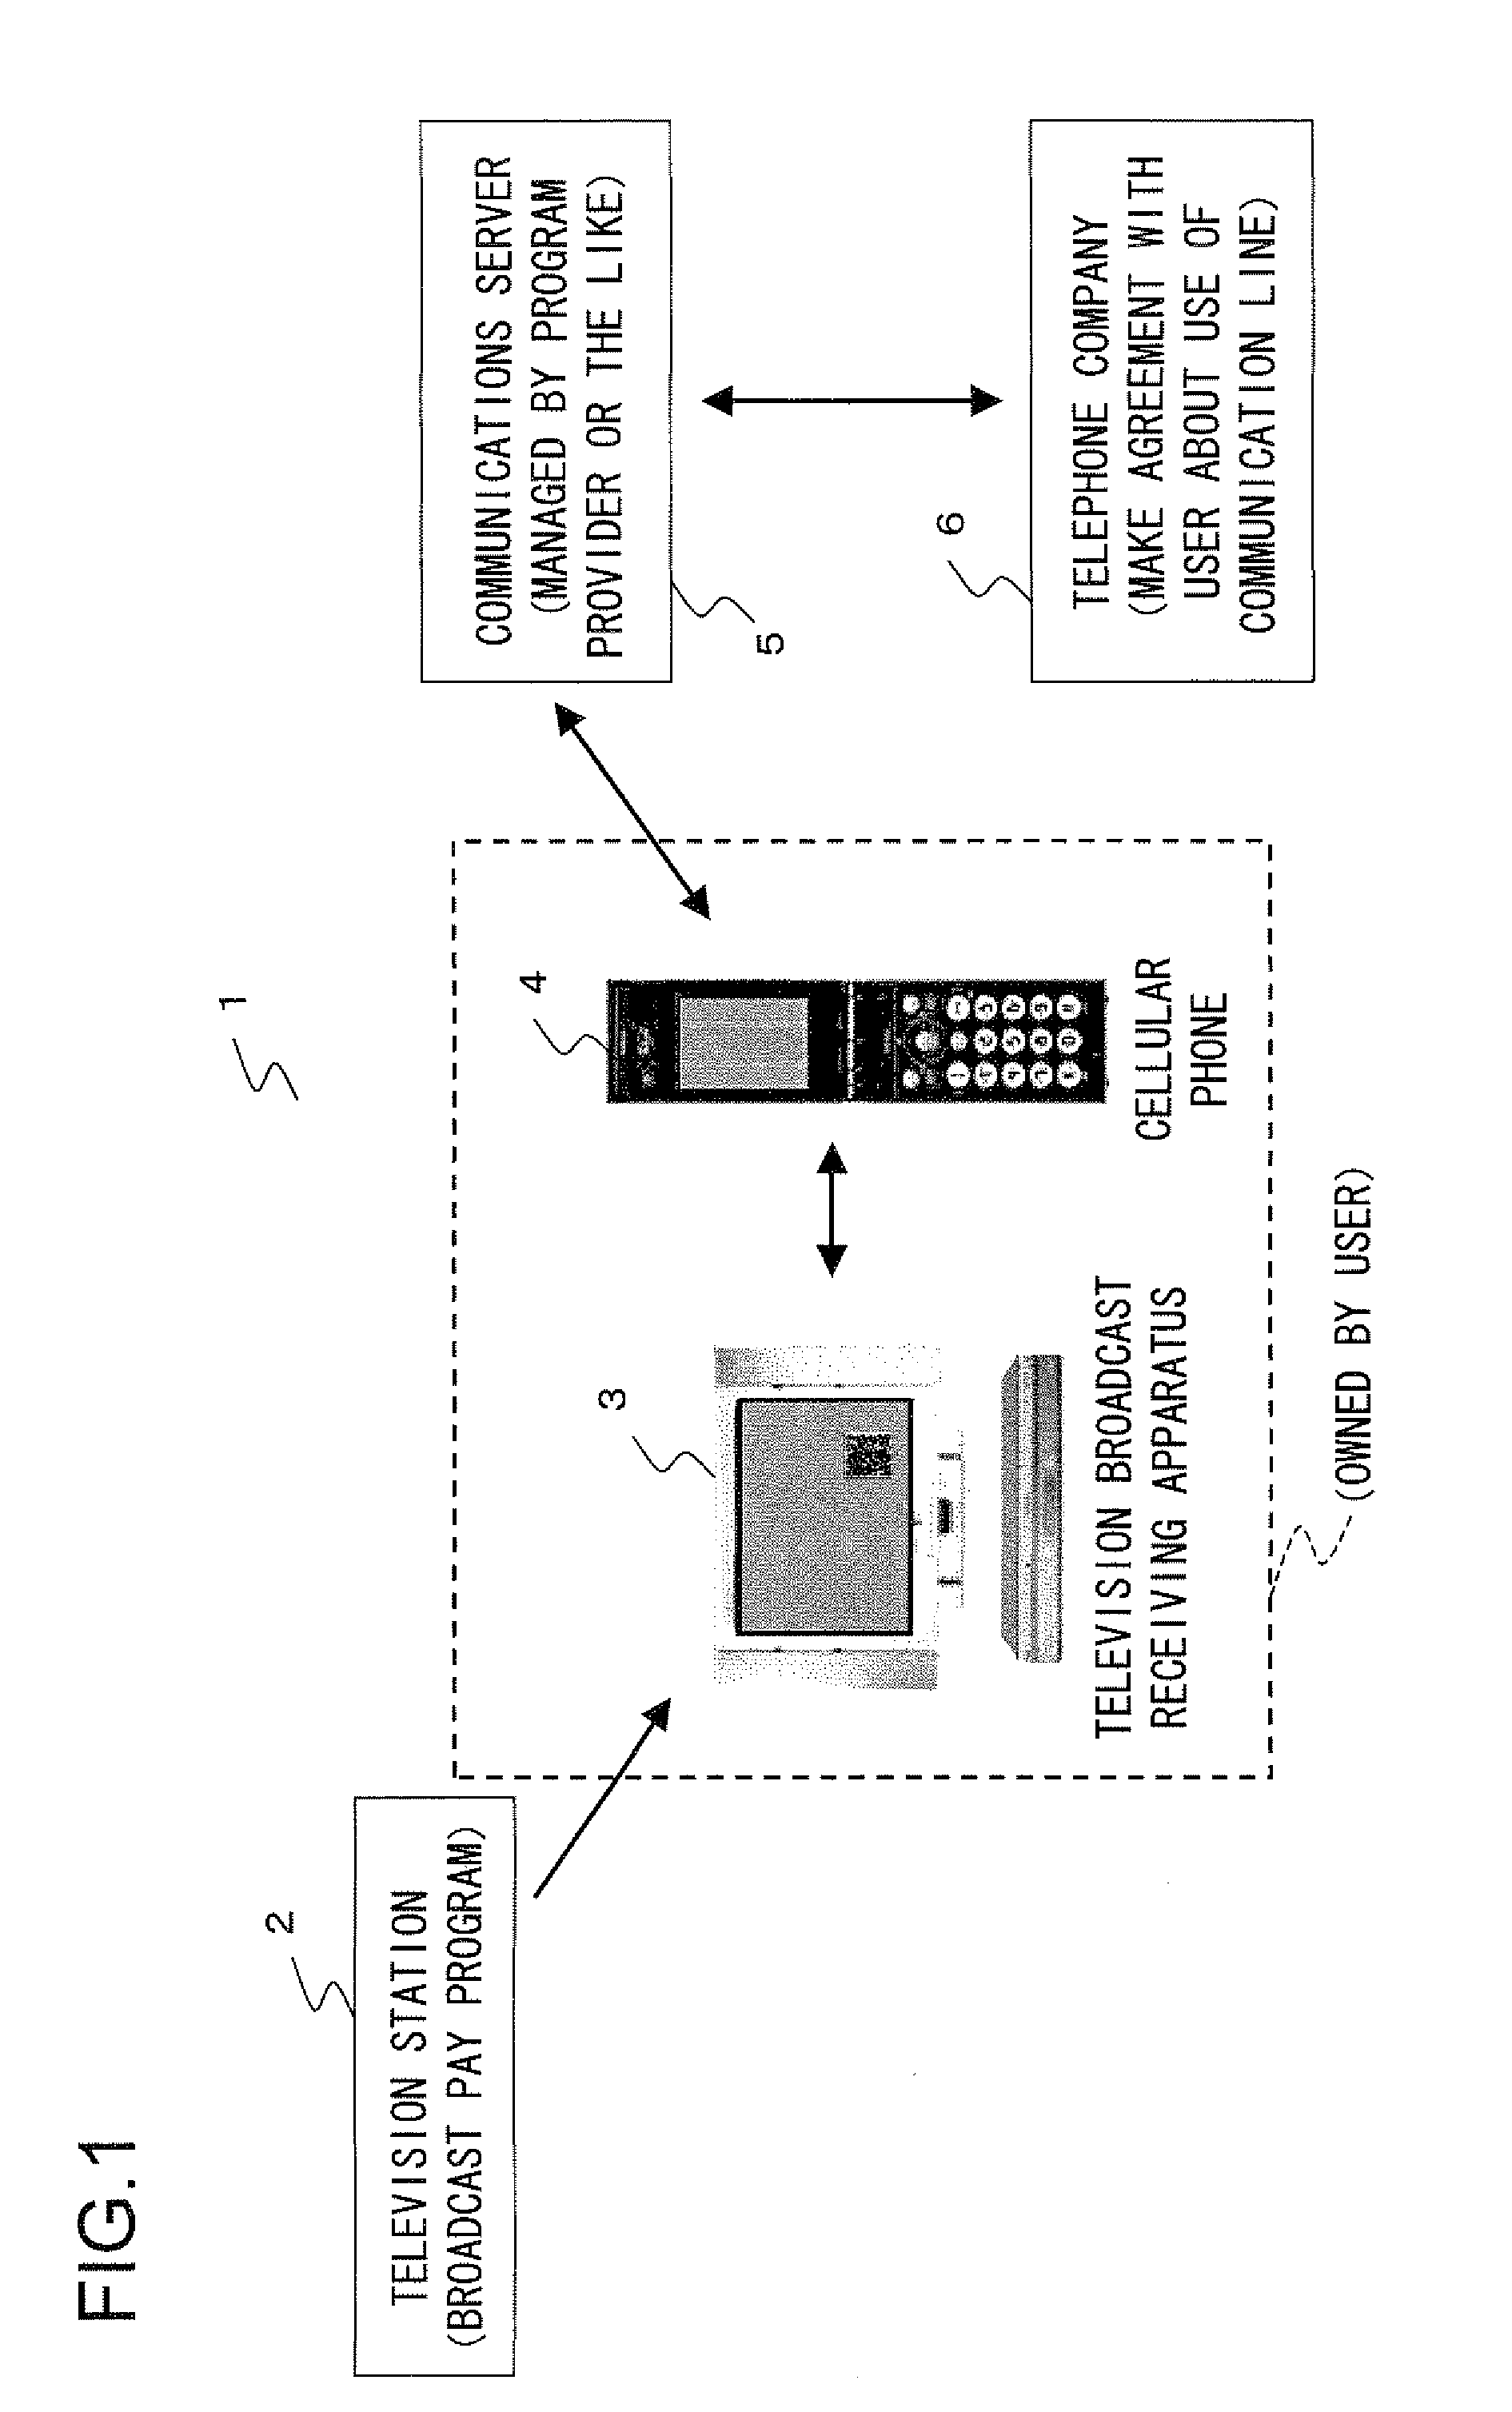 Broadcast receiving apparatus and pay program providing system